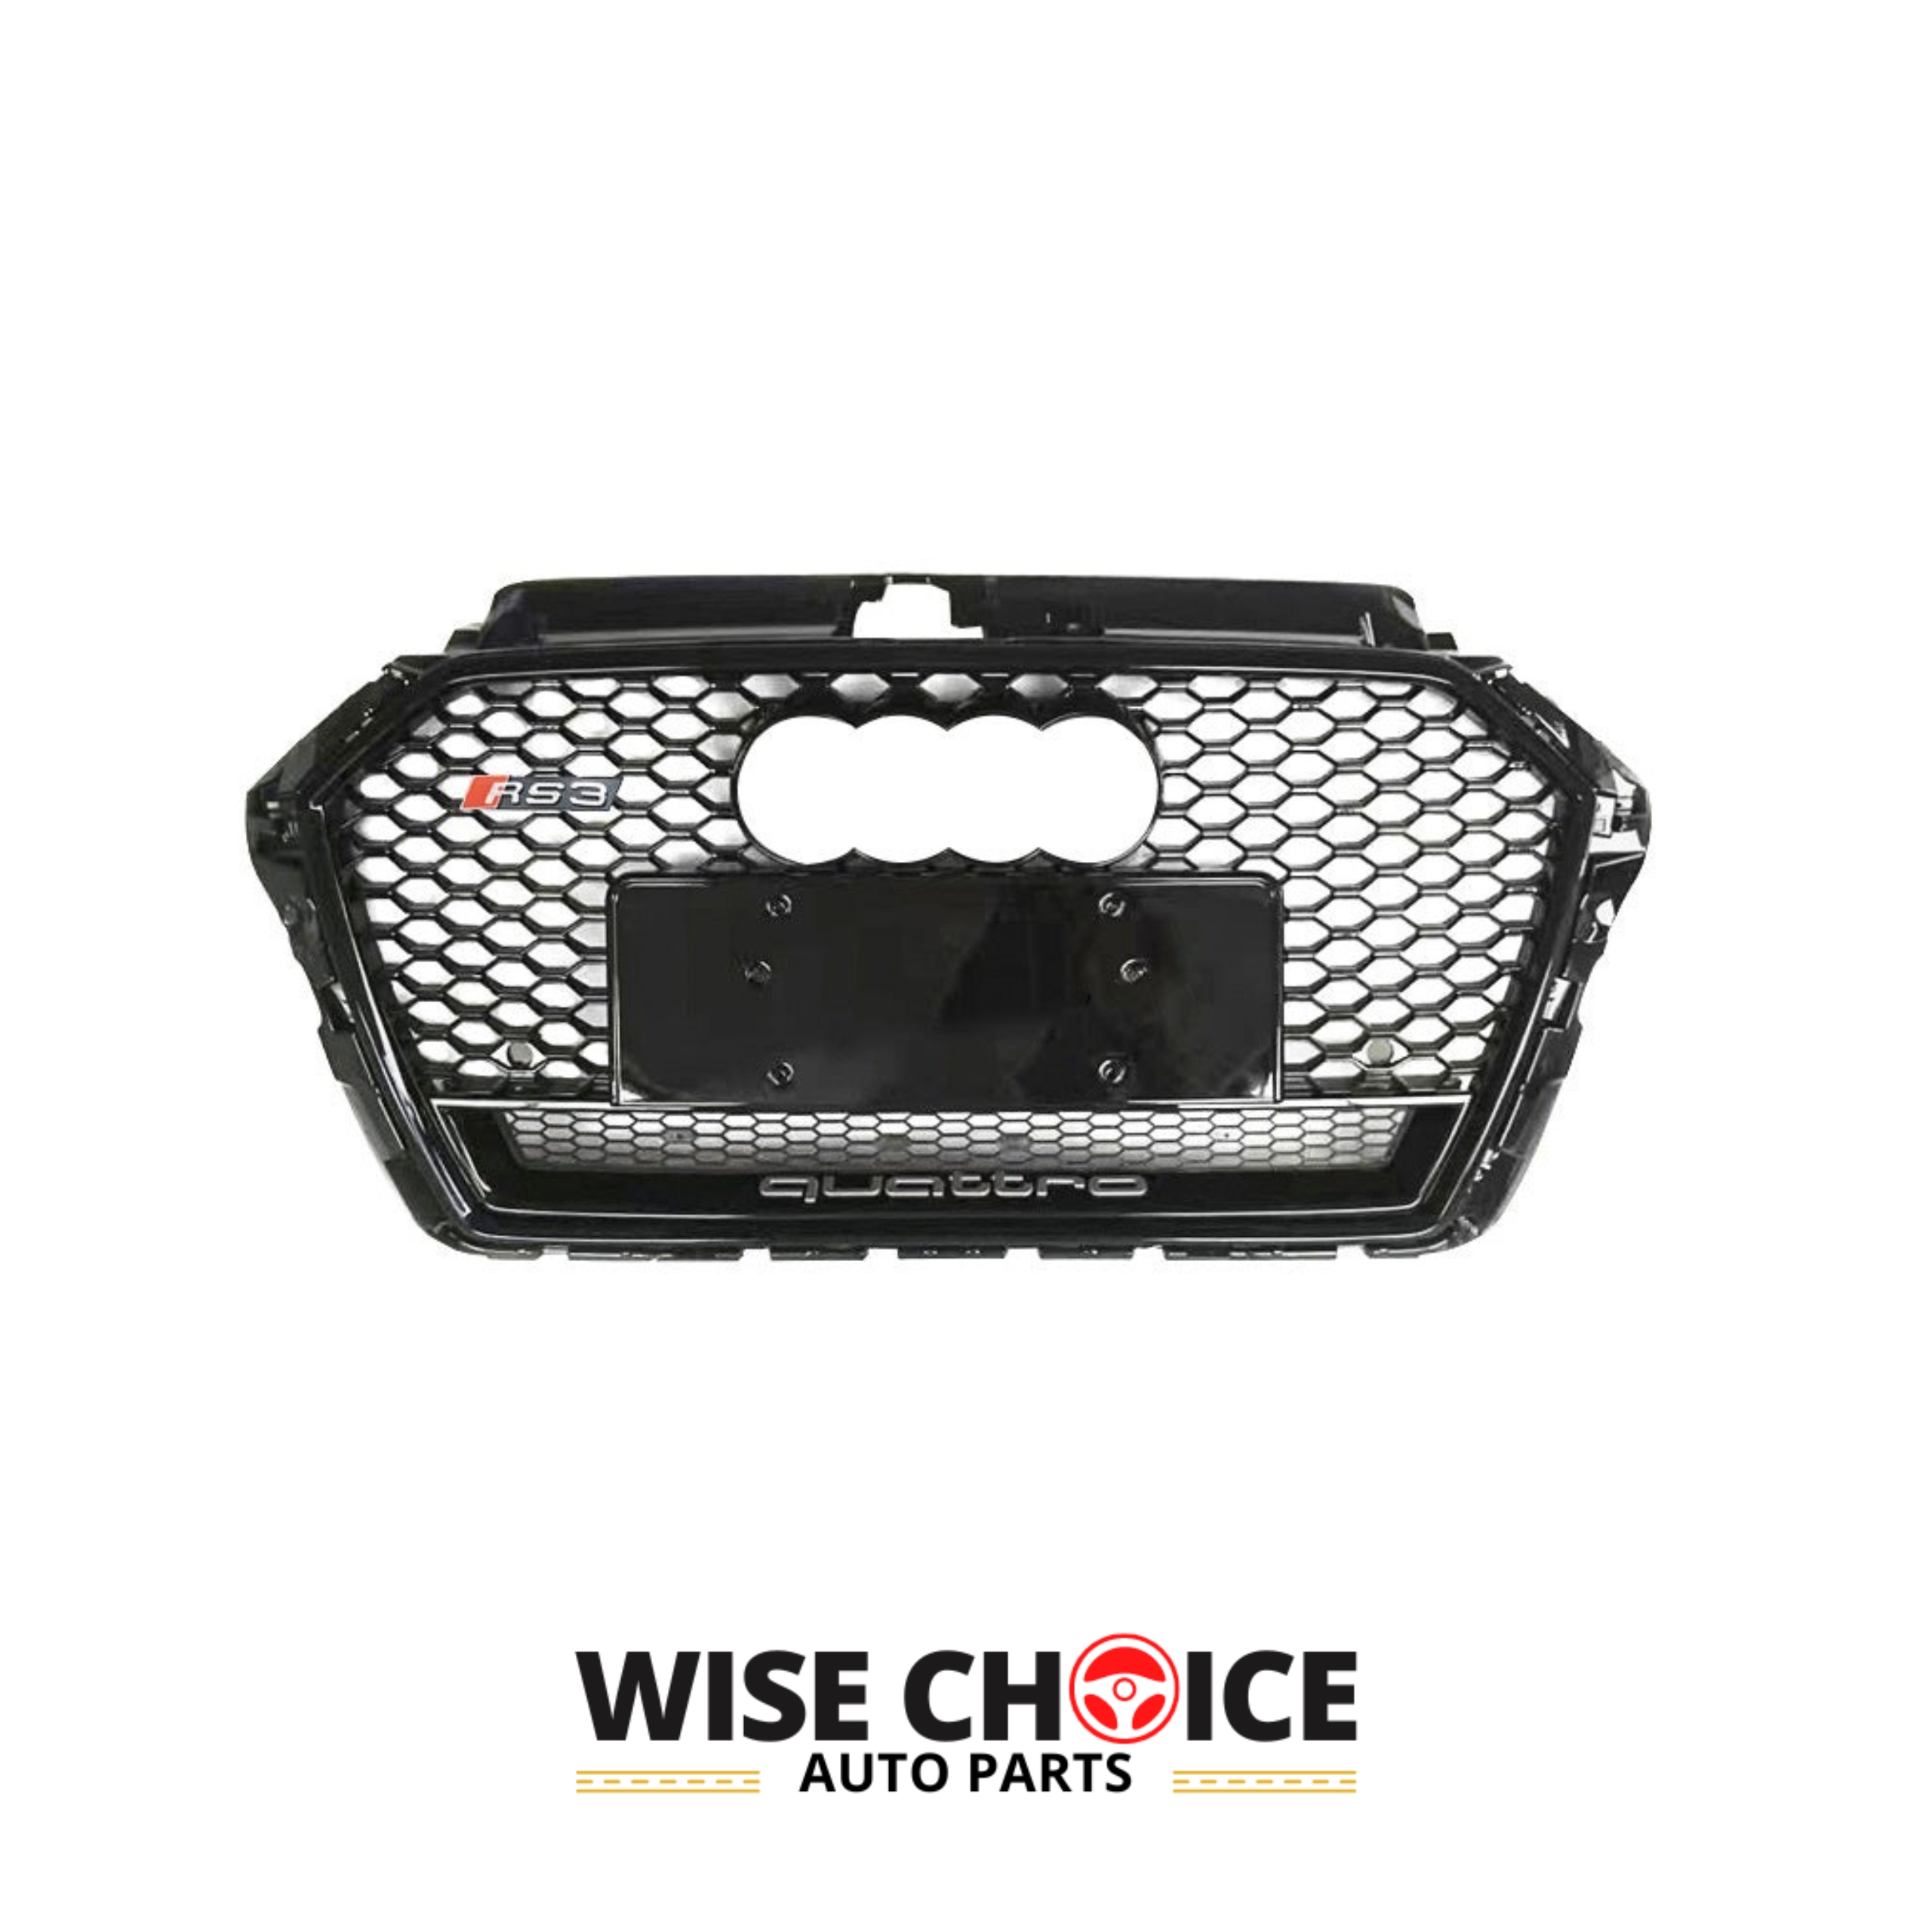 Audi RS3 Honeycomb Front Grille with Lower Mesh | 2017-2020 8V.5 A3/S3 Upgrade